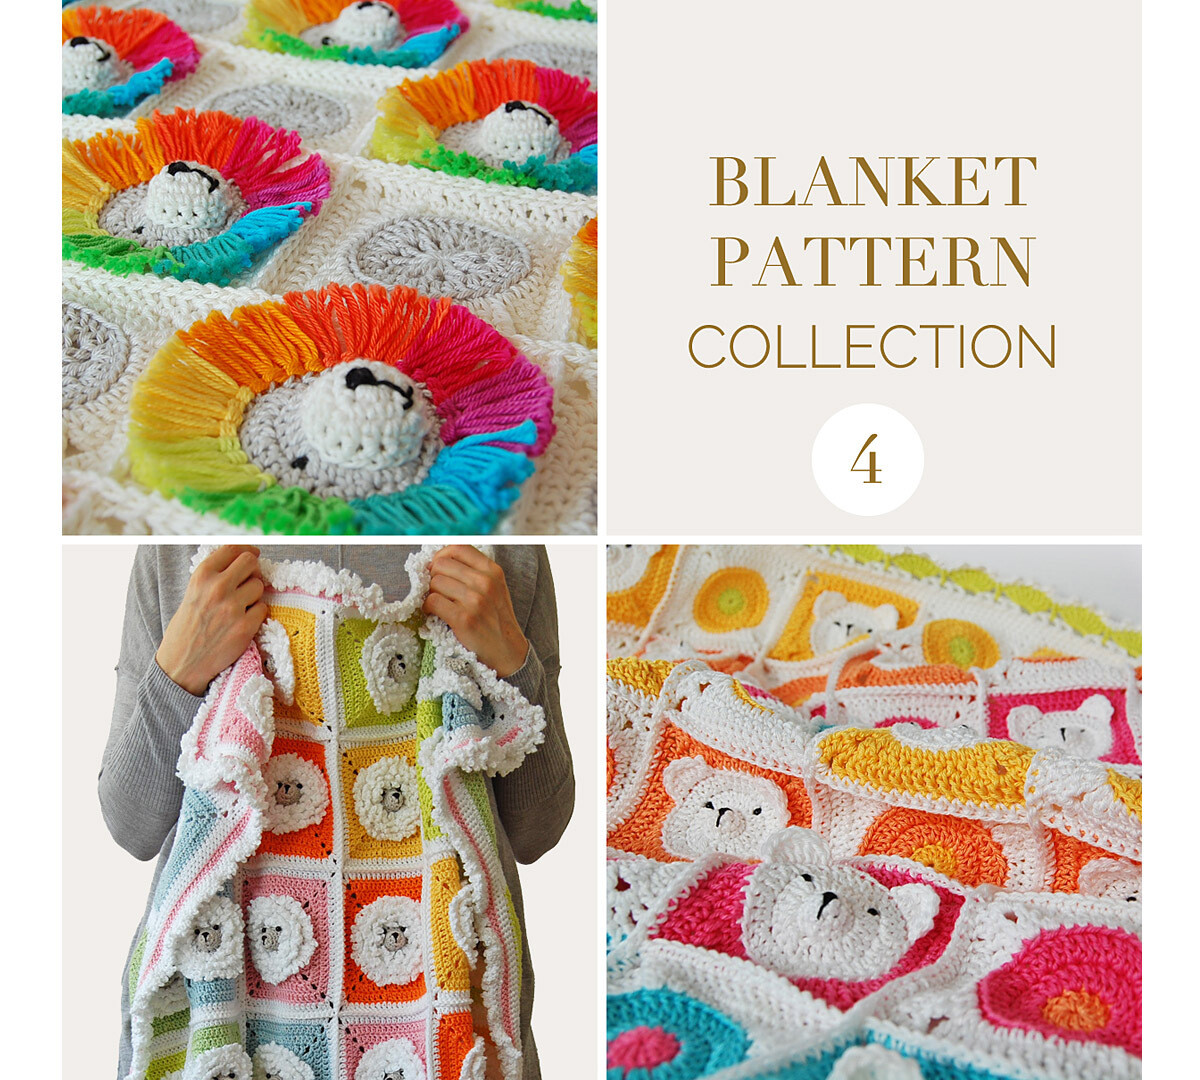 CROCHET BLANKET PATTERN COLLECTION 4